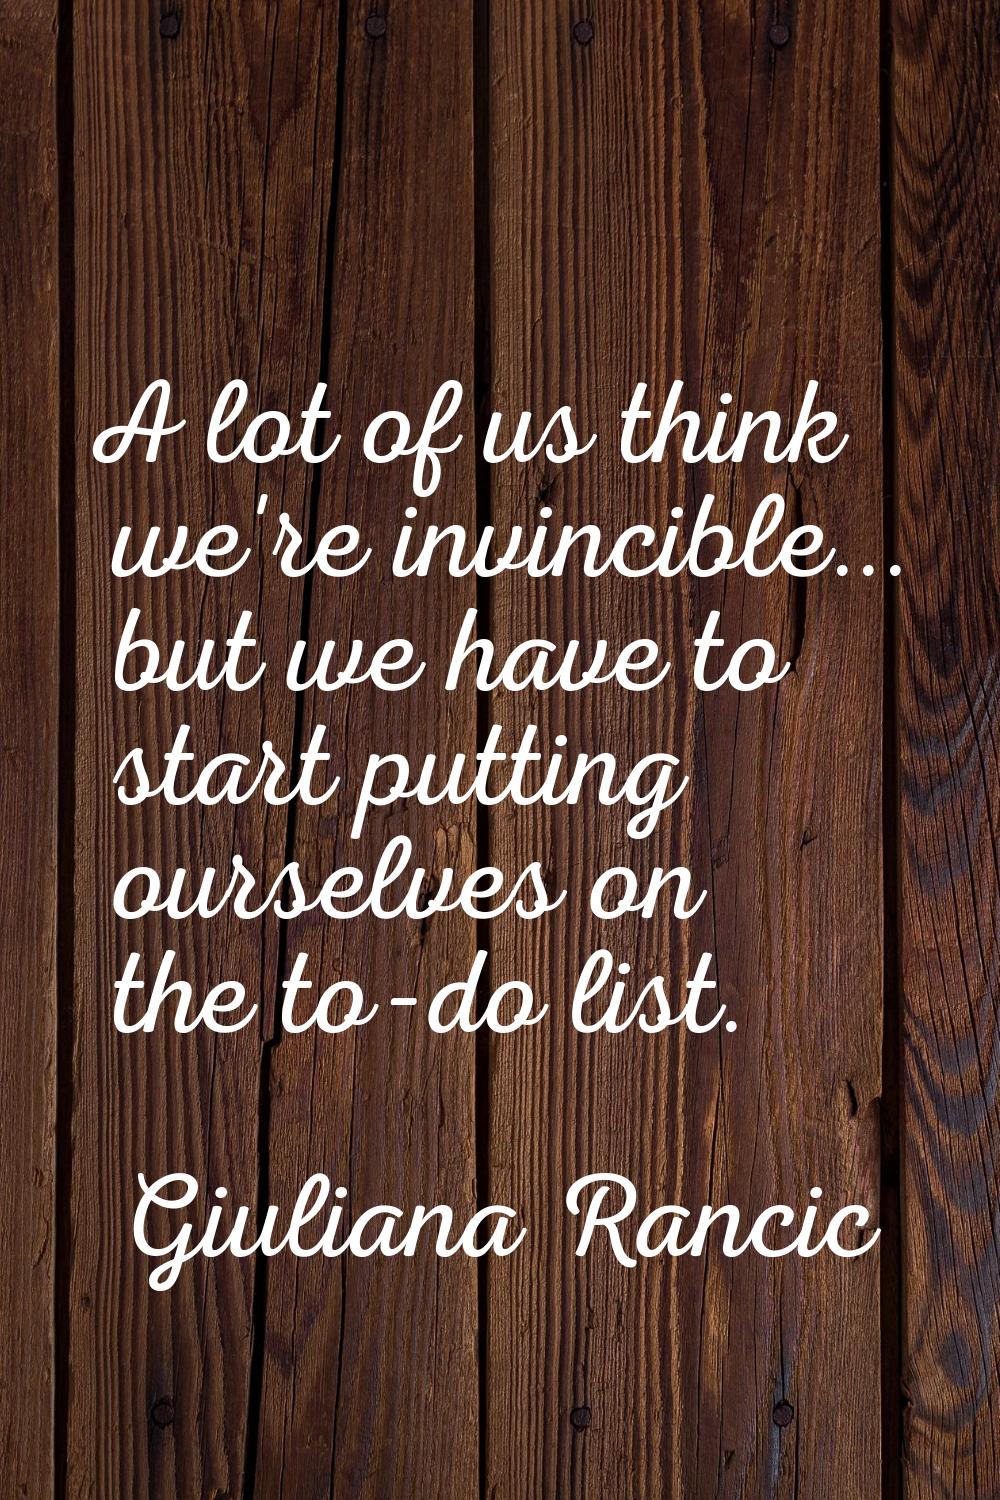 A lot of us think we're invincible... but we have to start putting ourselves on the to-do list.